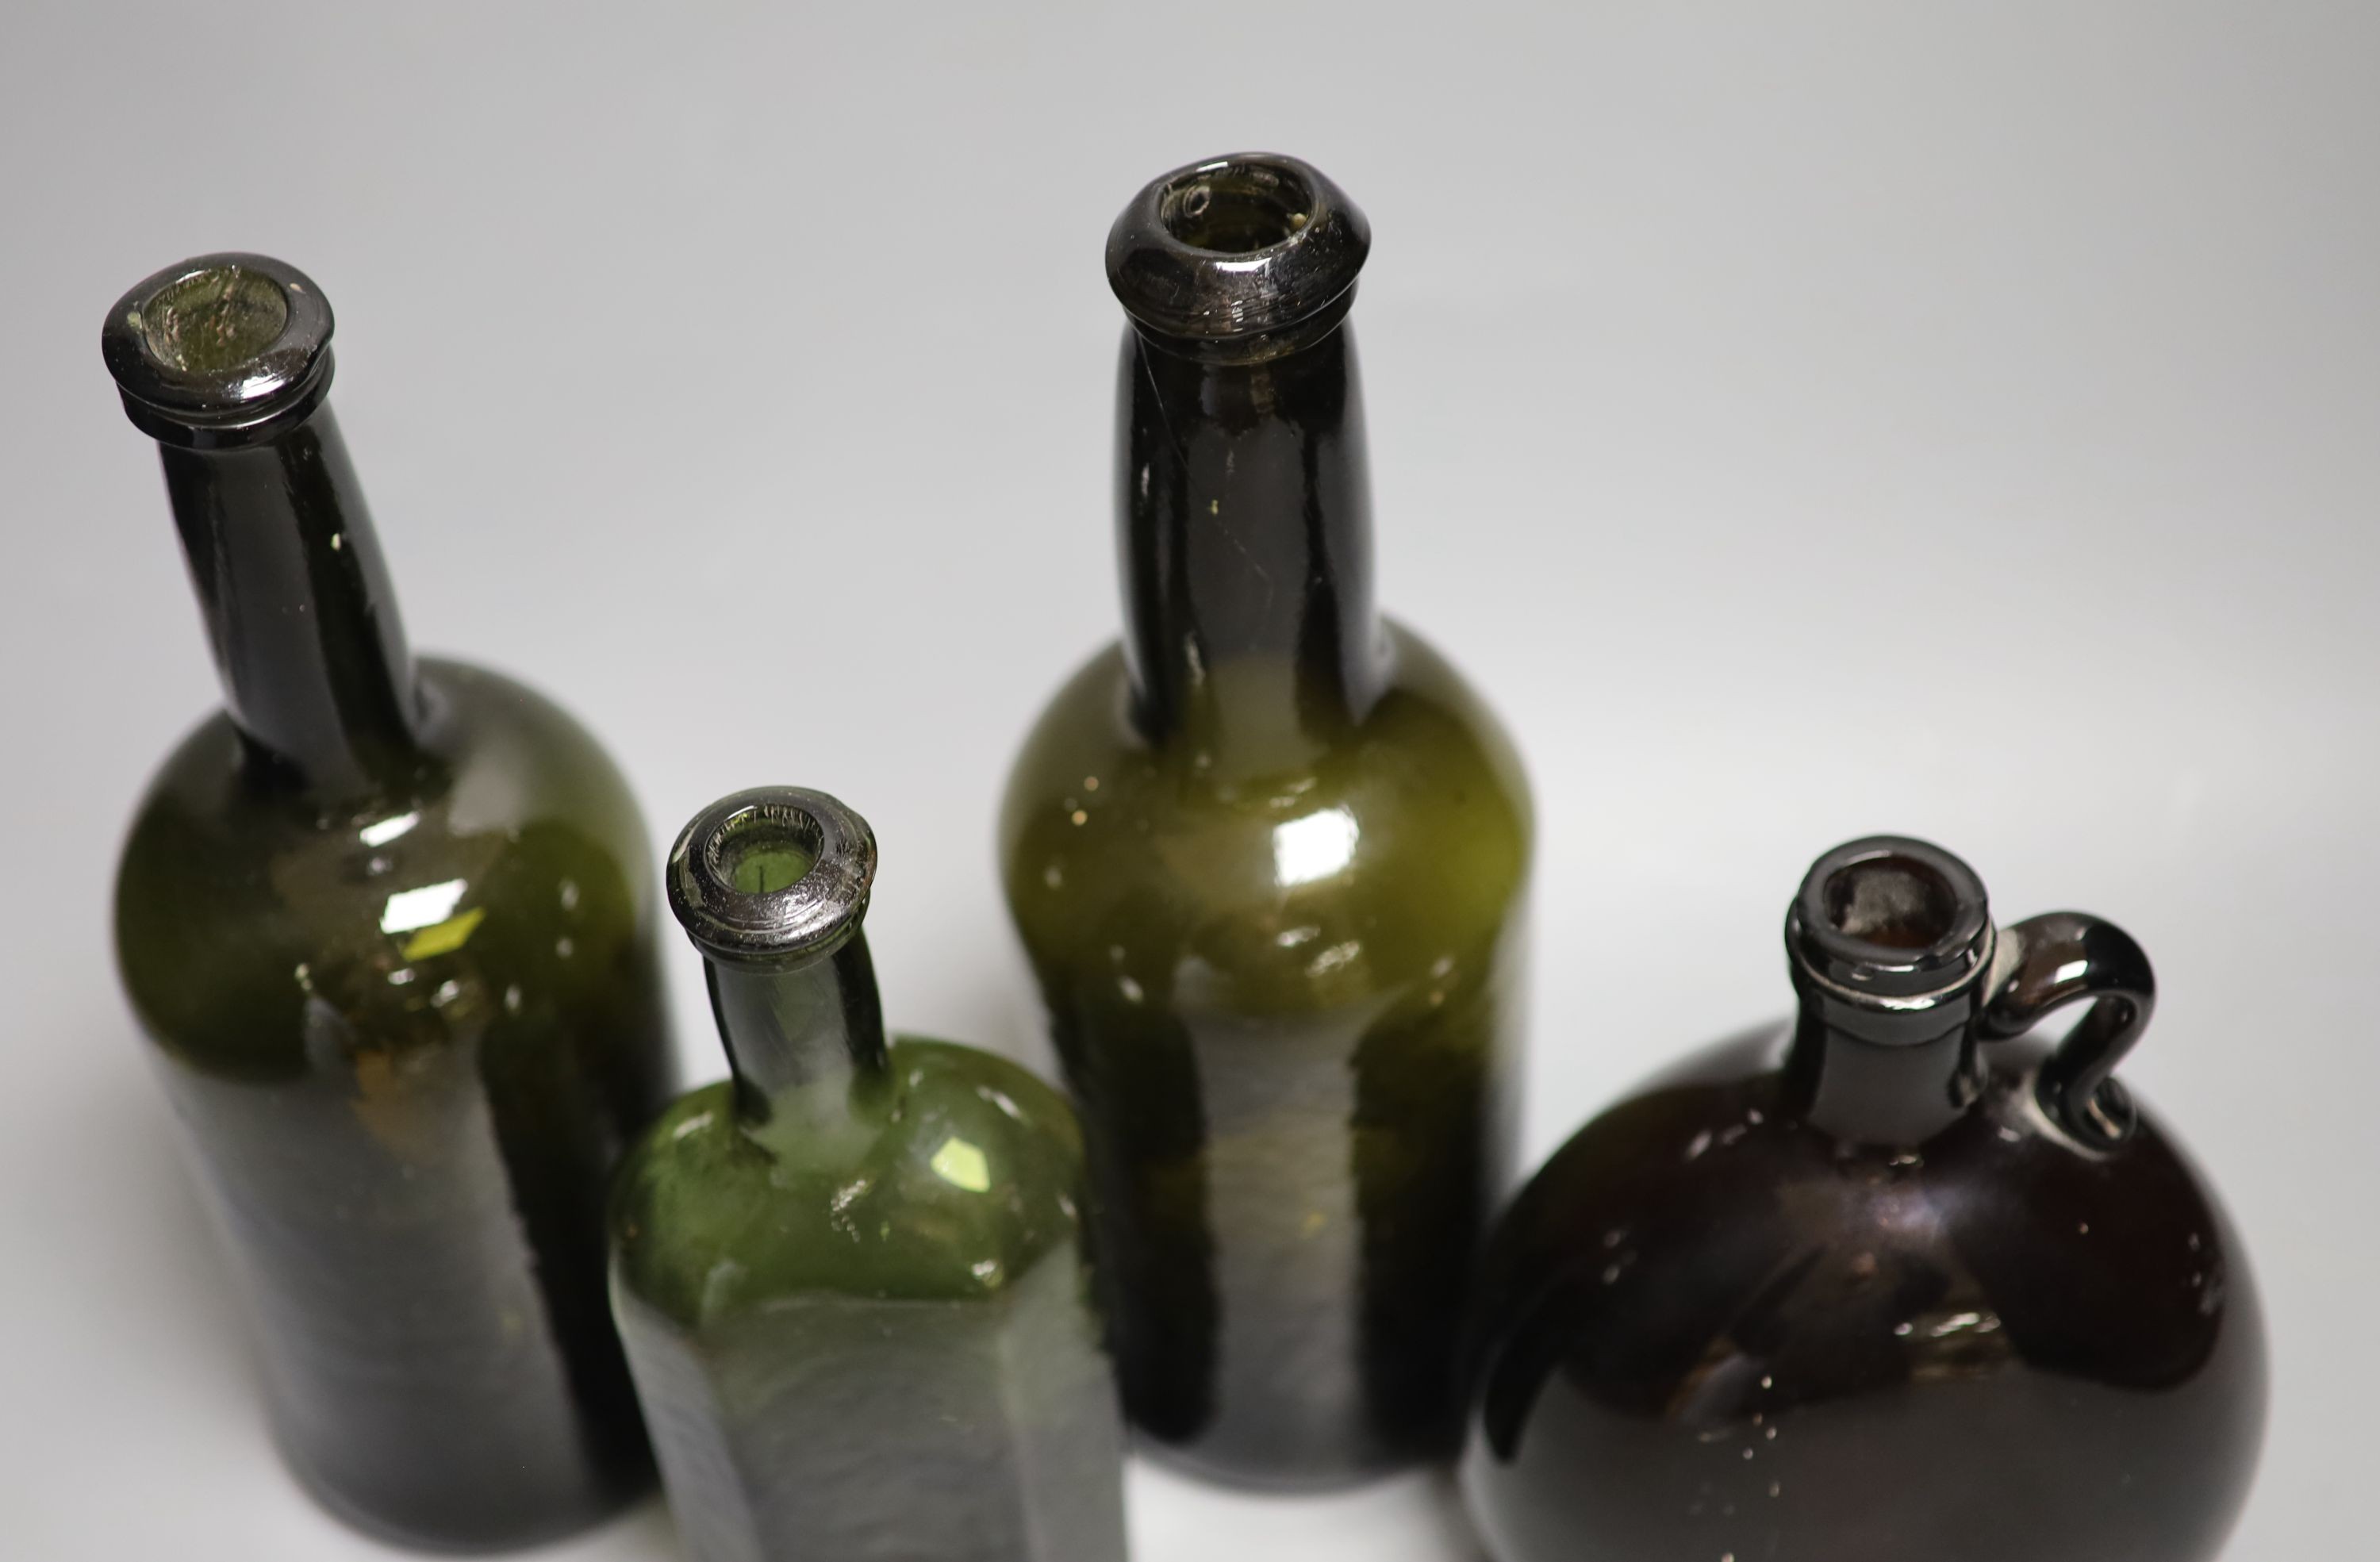 Two English dark green glass wine bottles, late 18th century, a Victorian amber glass hock jug and an early 19th century dark green glass small bottle, tallest 26.5cm (4)